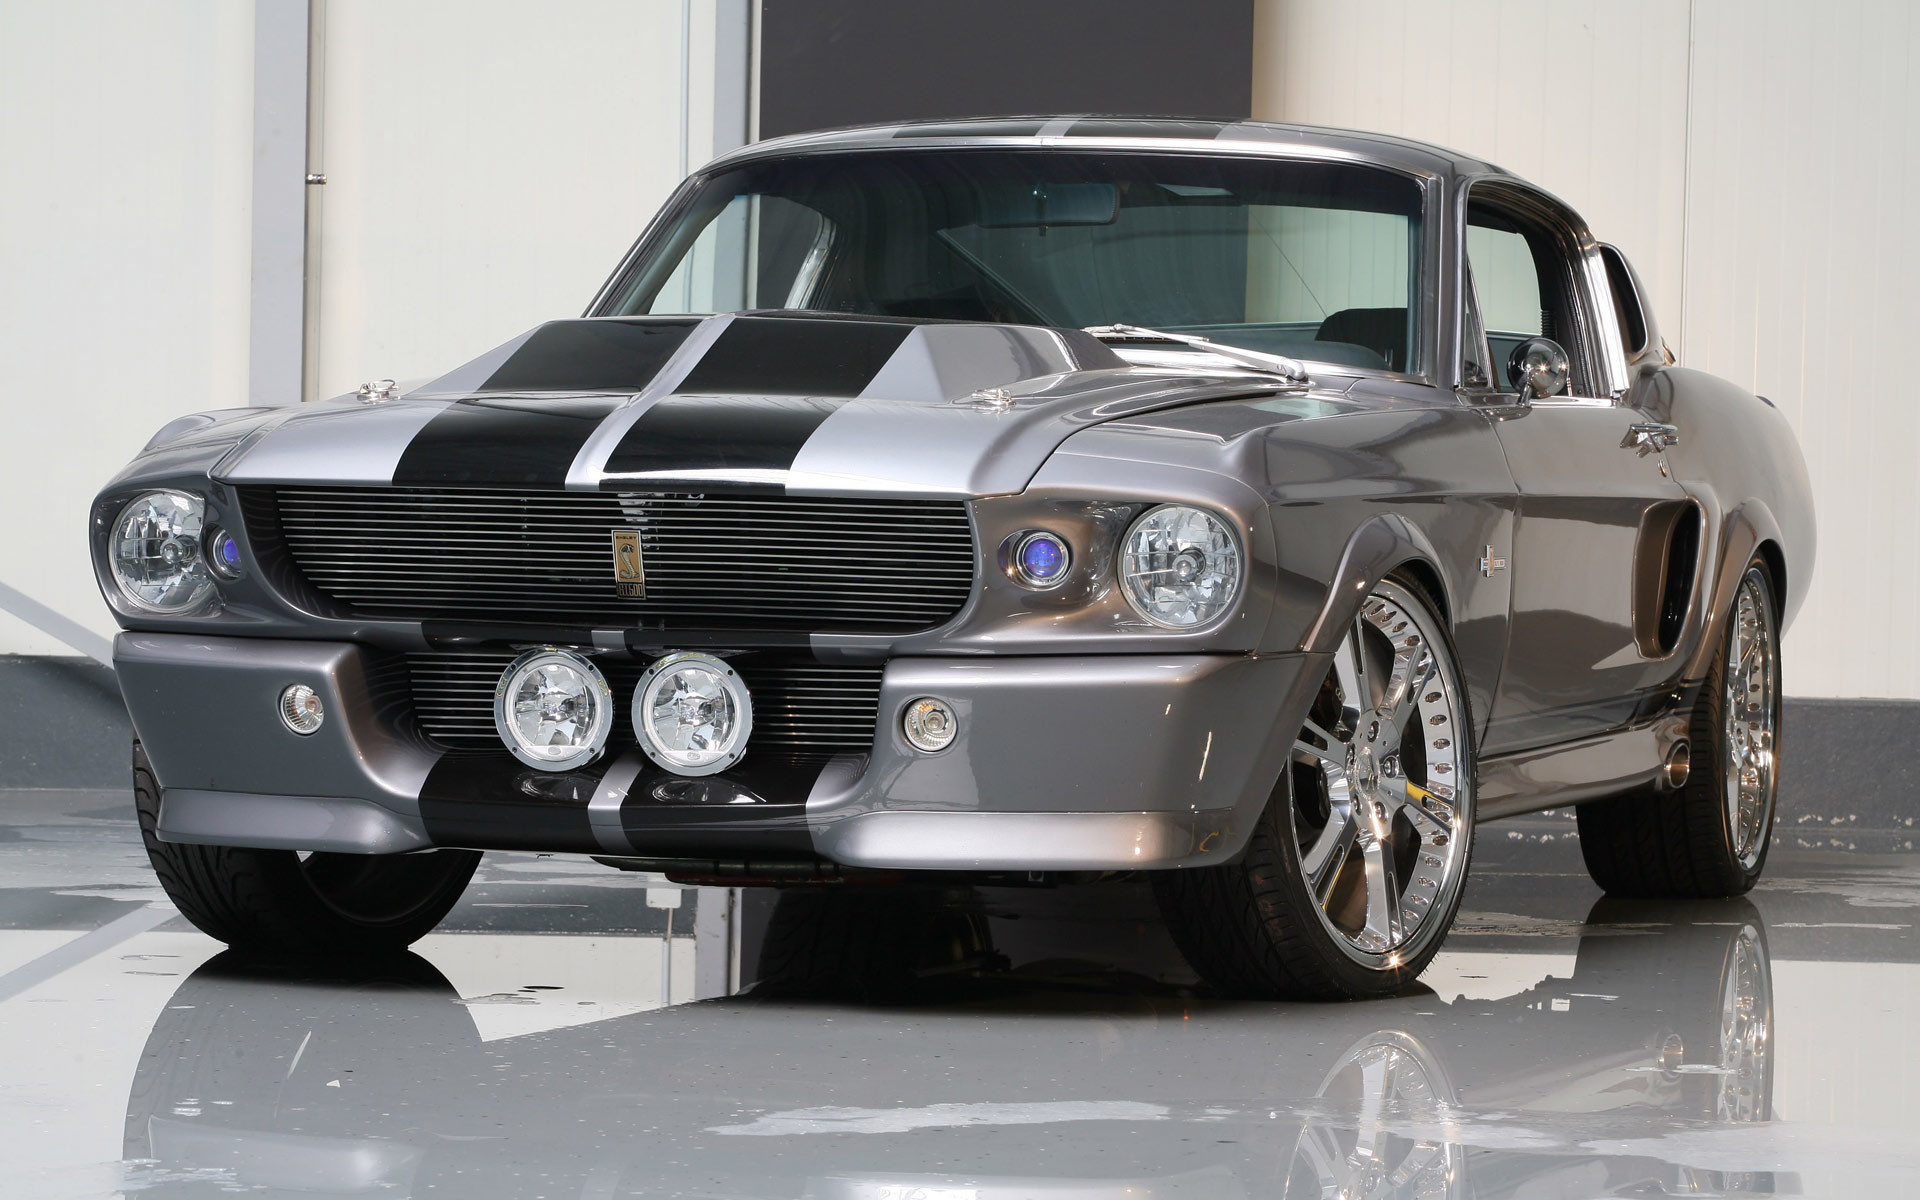 Ford Mustang Shelby GT500 Eleanor Ford car